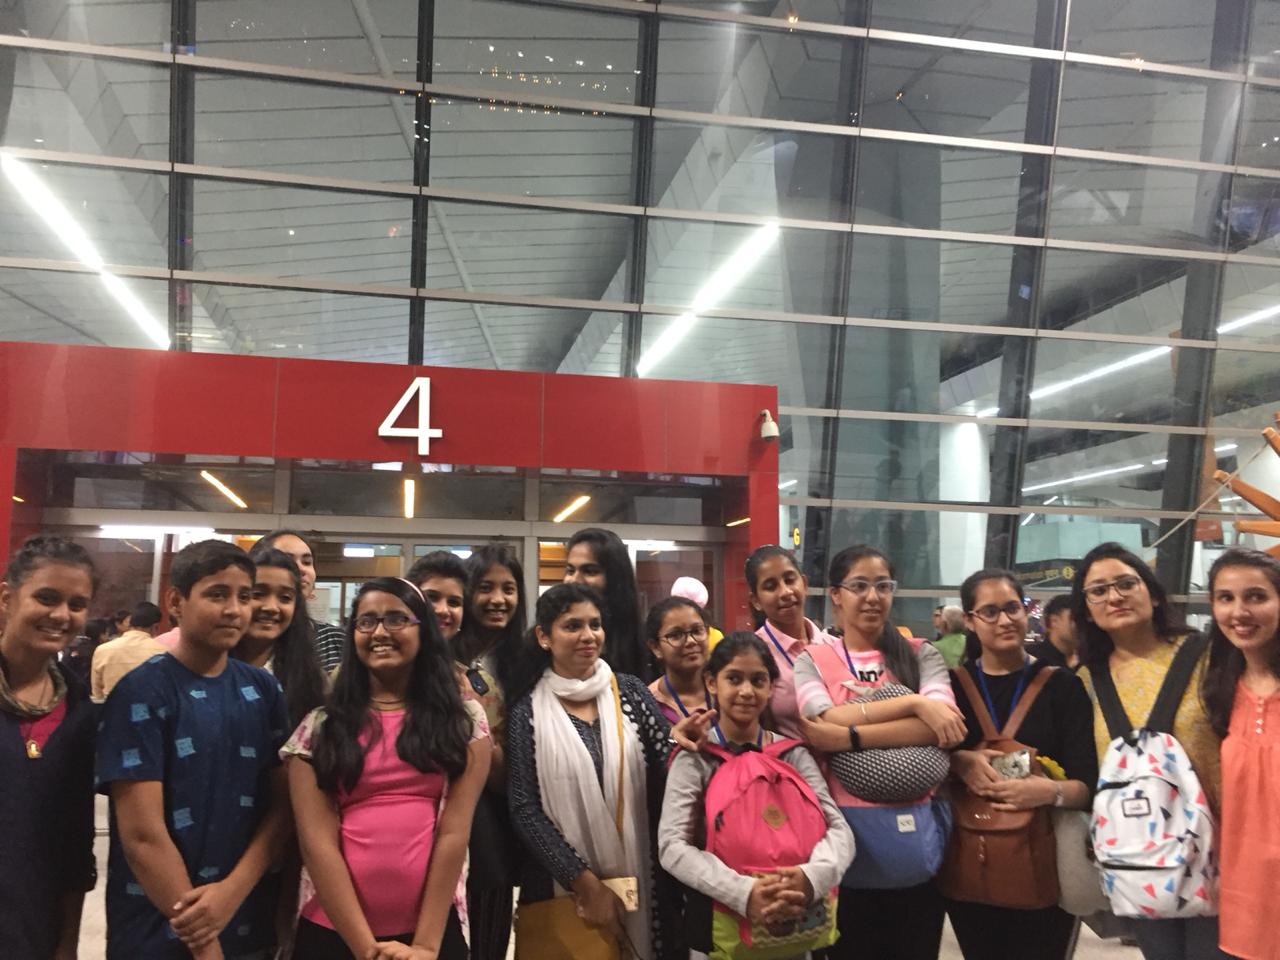 Nantes in France welcomes Indian School Group on 20th May 2019